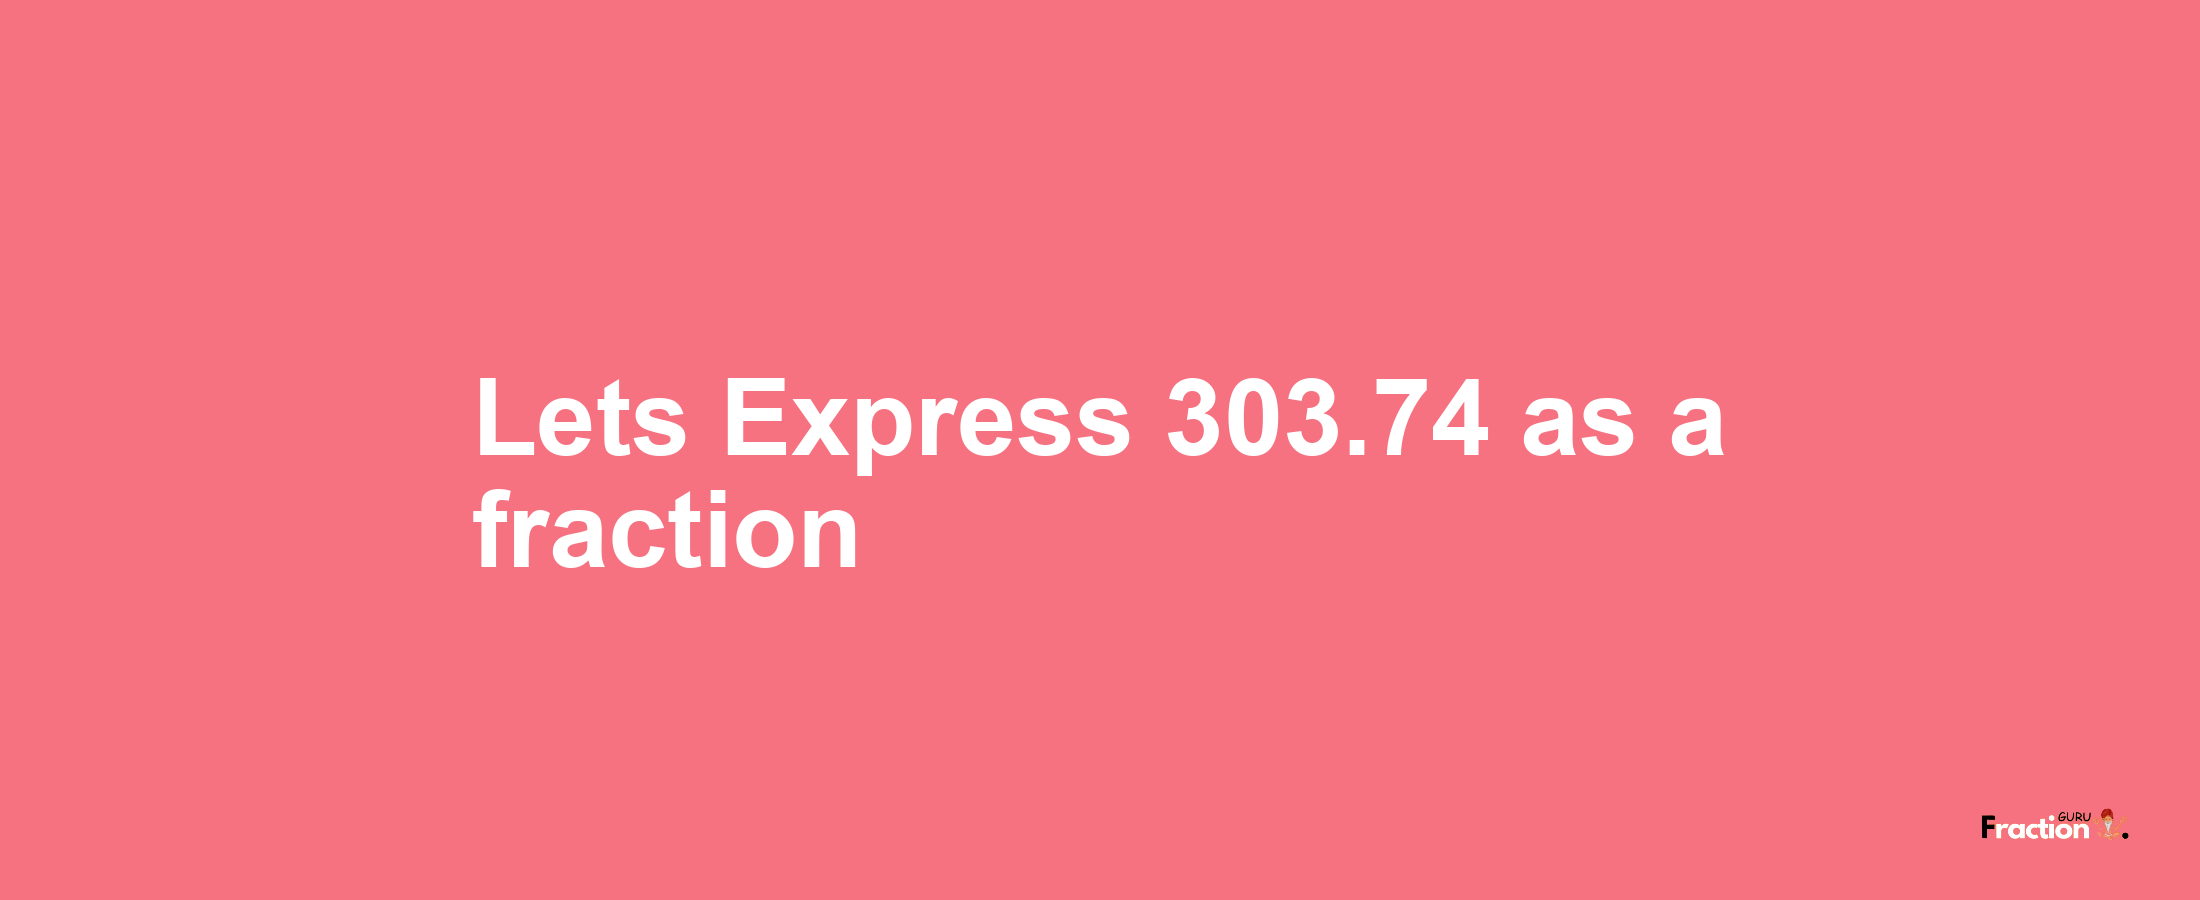 Lets Express 303.74 as afraction